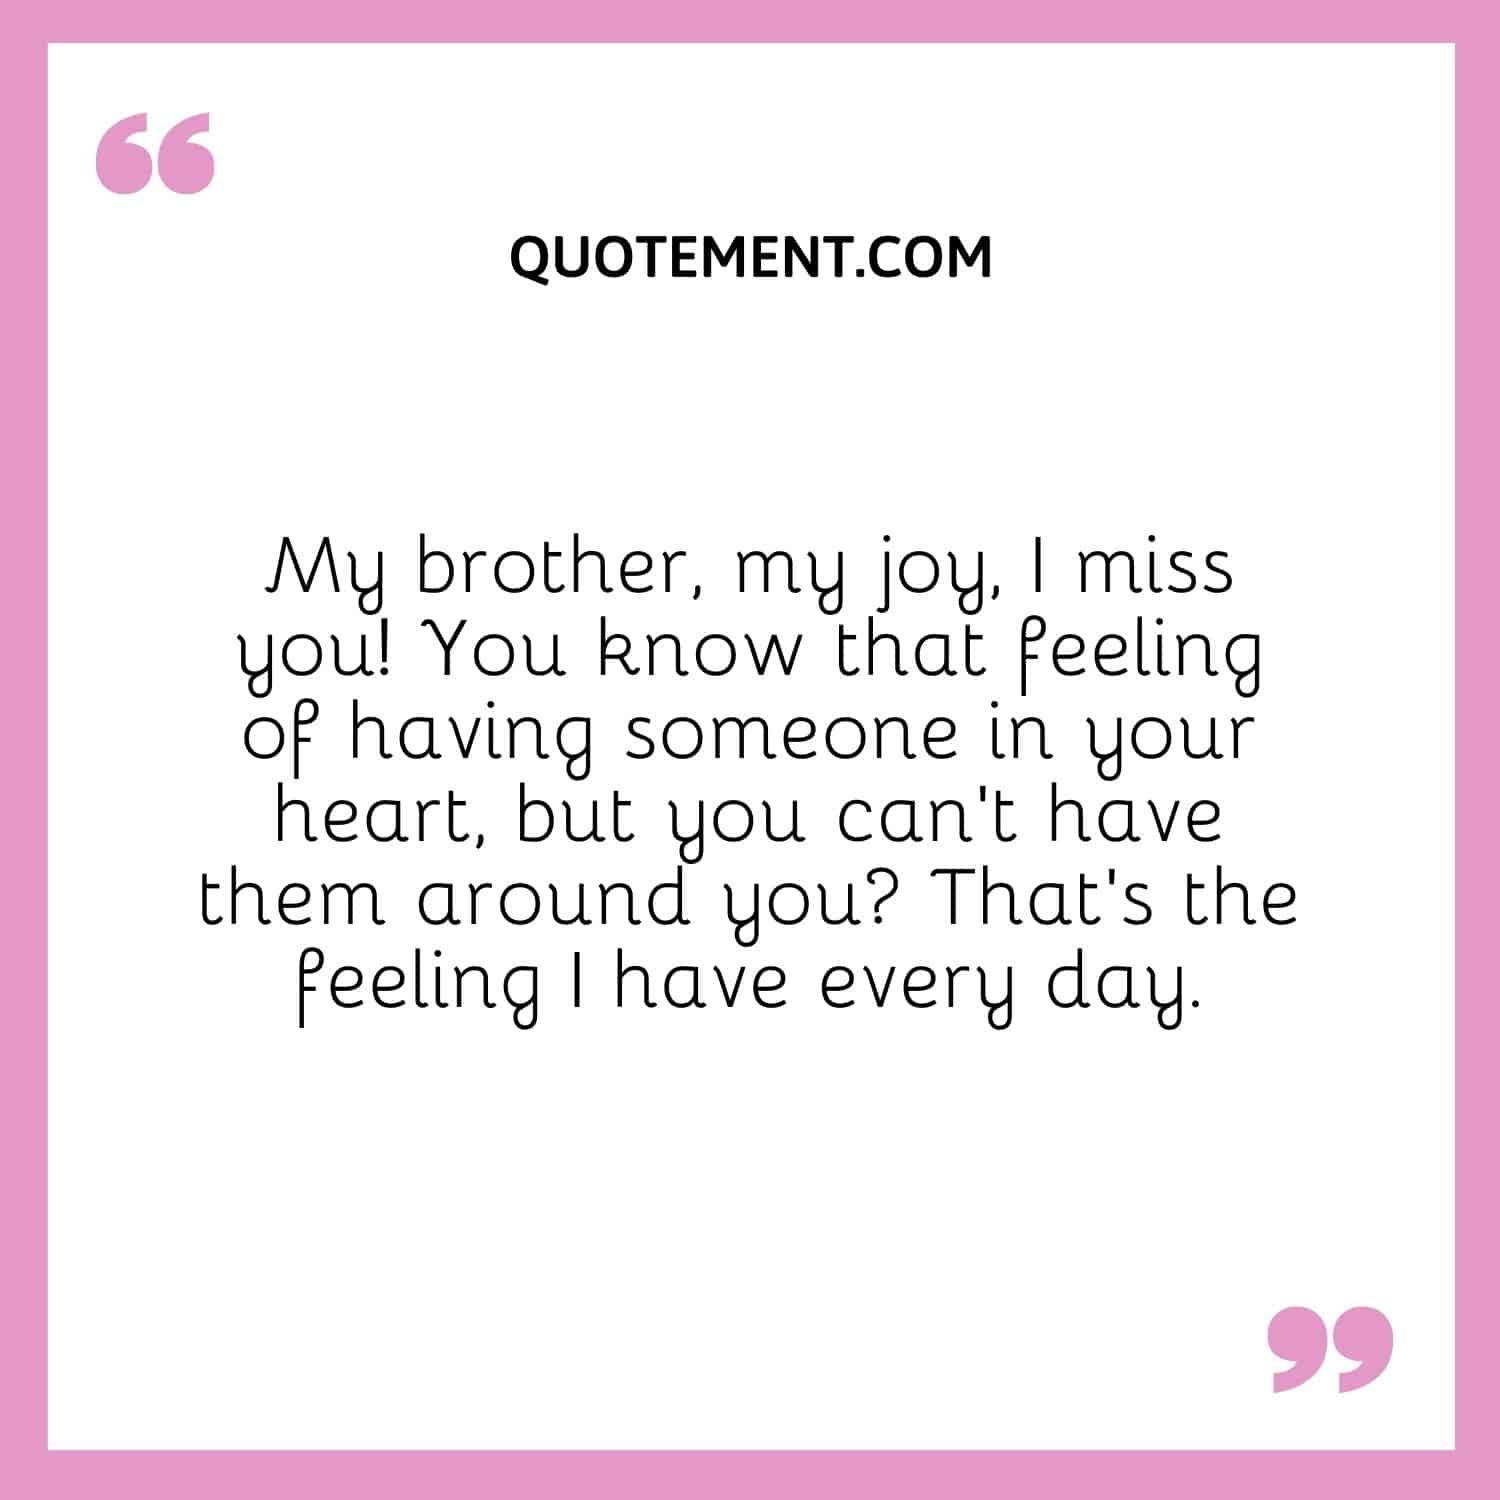 My brother, my joy, I miss you! You know that feeling of having someone in your heart, but you can’t have them around you That’s the feeling I have every day.